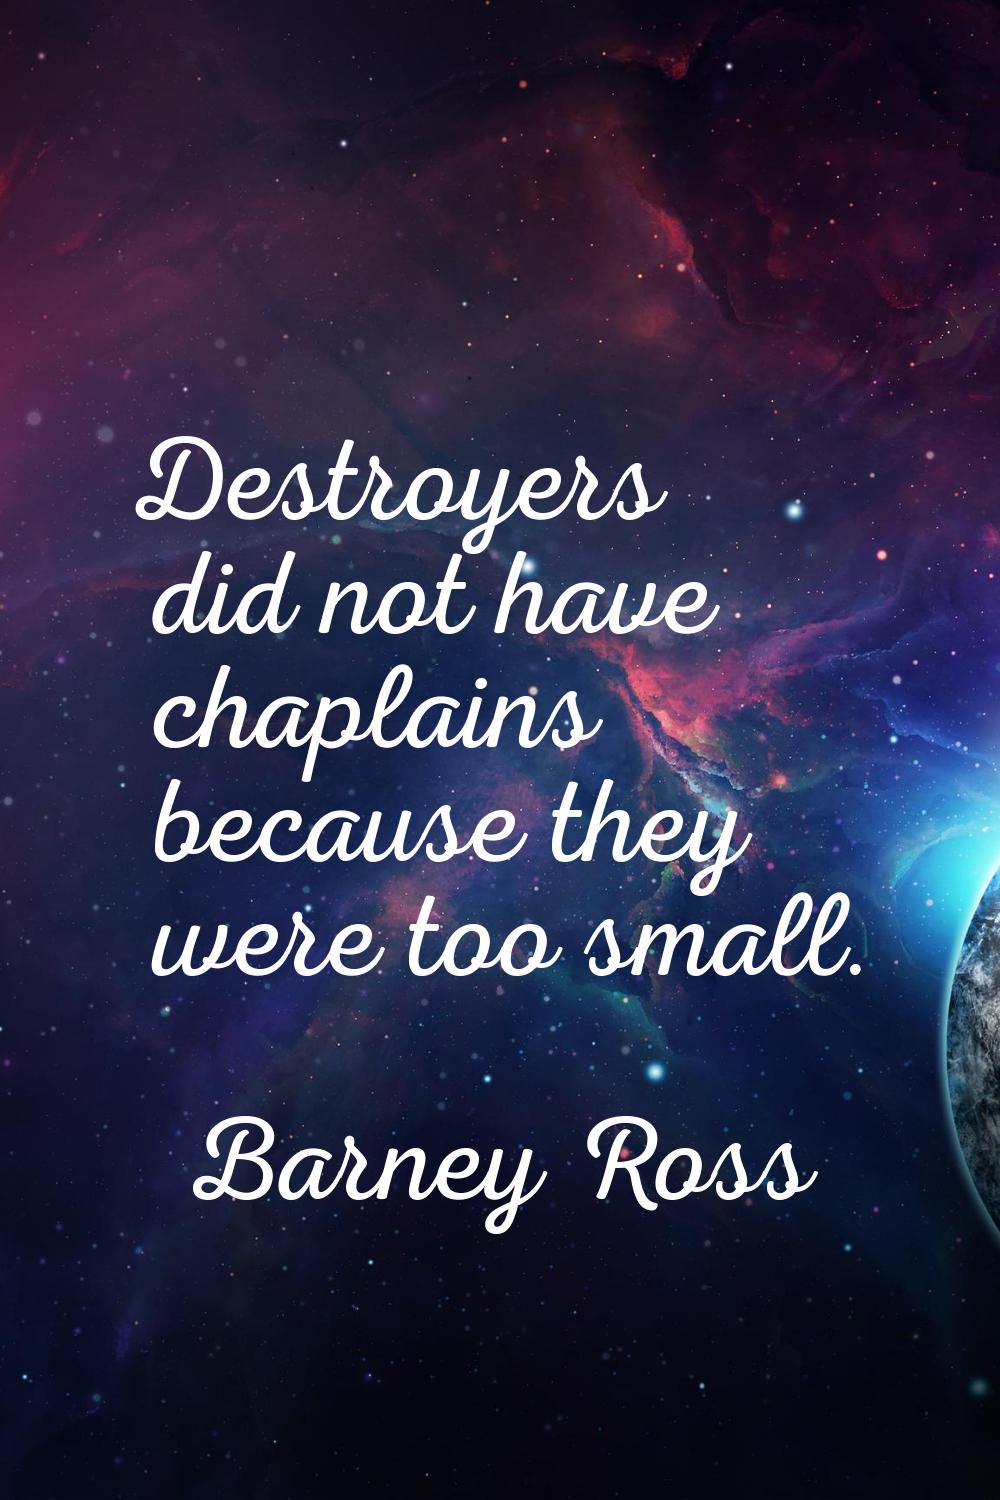 Destroyers did not have chaplains because they were too small.